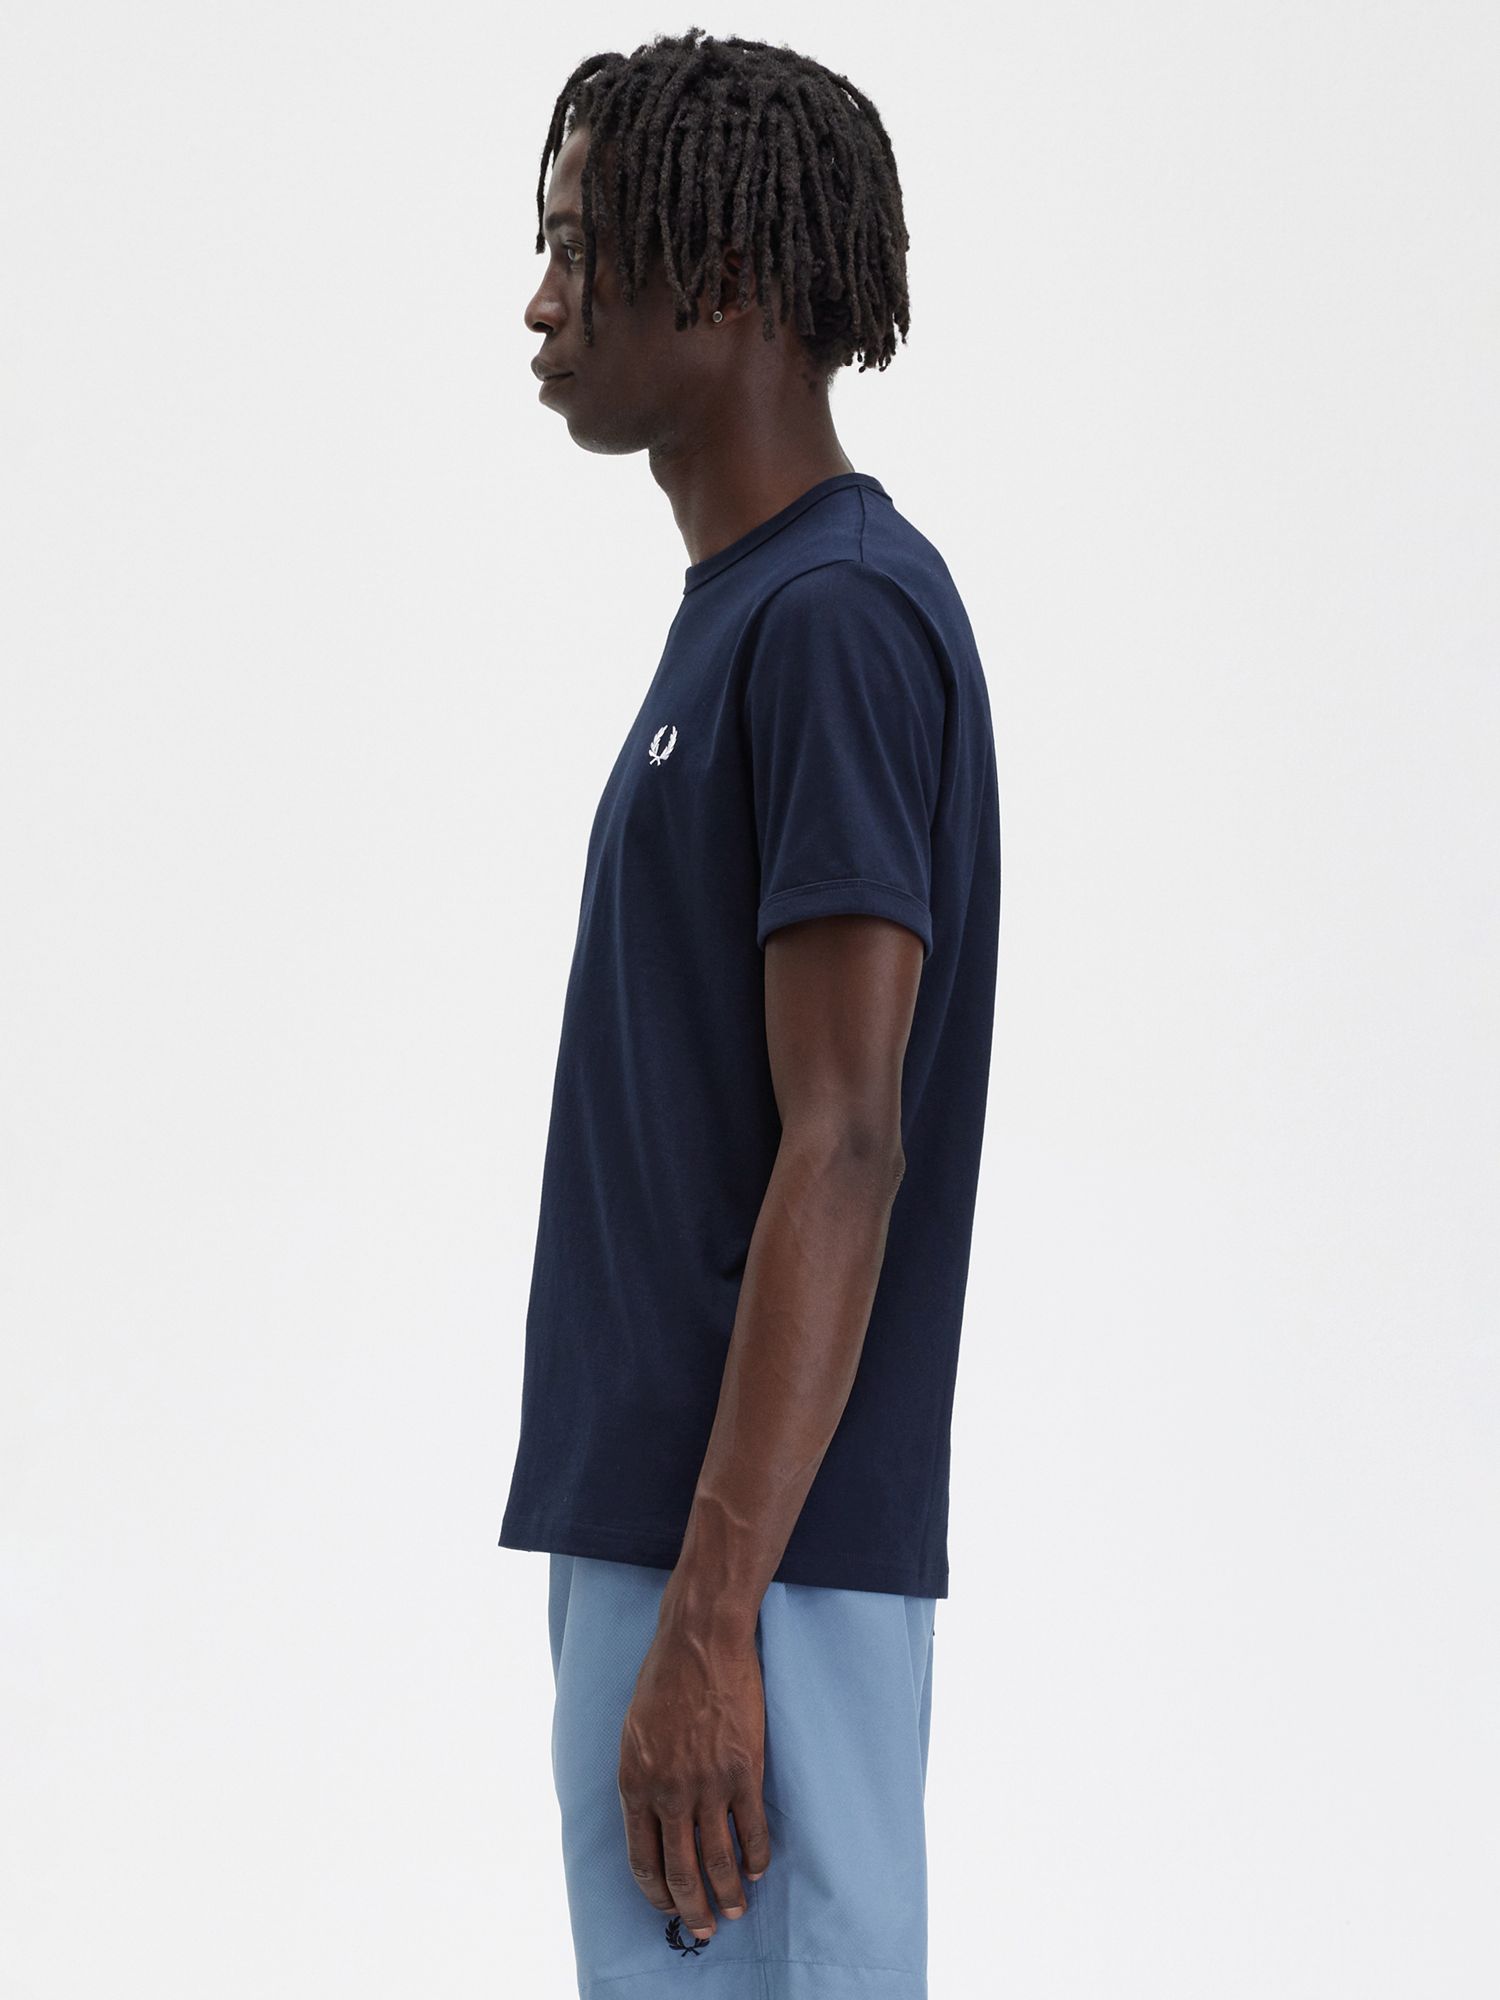 Fred Perry Ringer Crew Neck T-Shirt, Navy at John Lewis & Partners